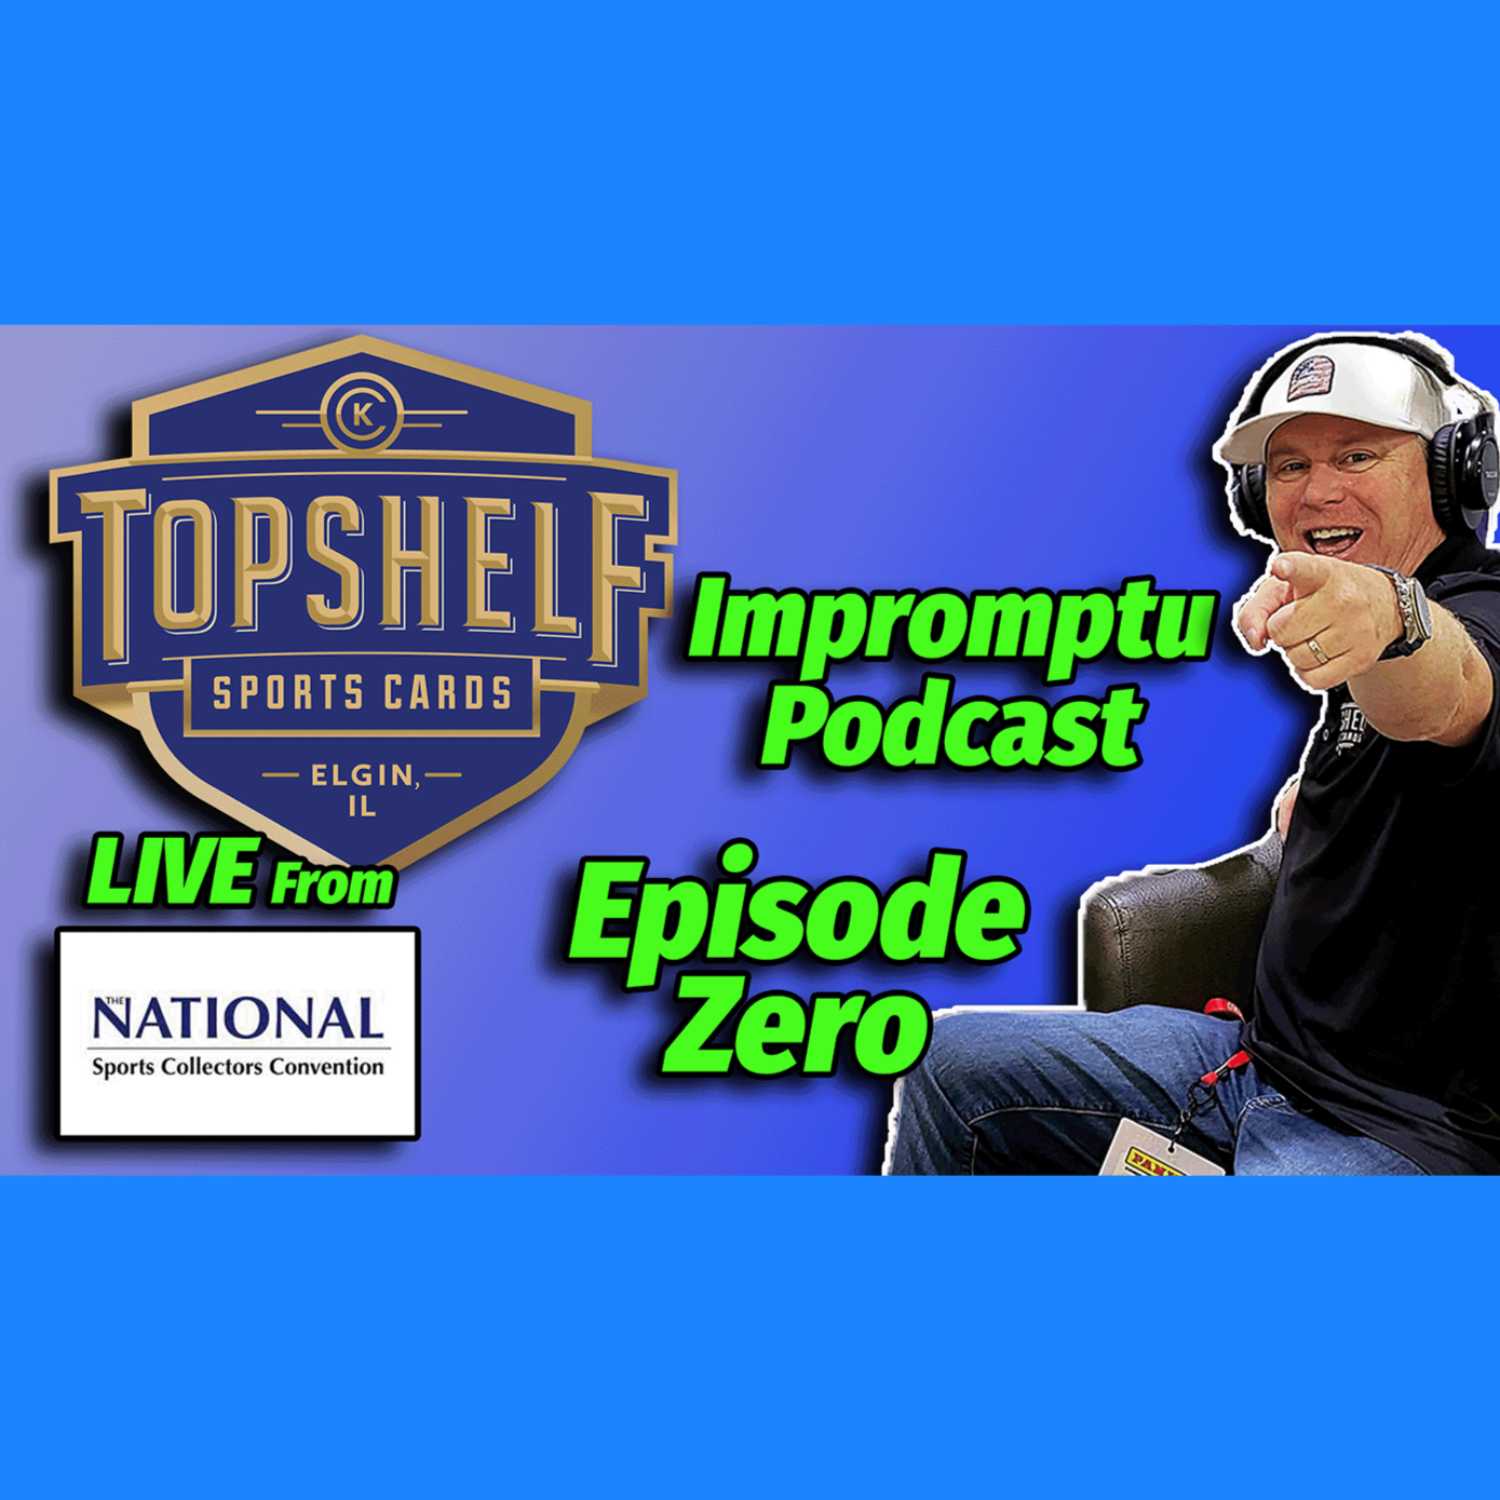 Top Shelf Sports Cards Impromptu Podcast: LIVE FROM THE NATIONAL. Episode: ZERO